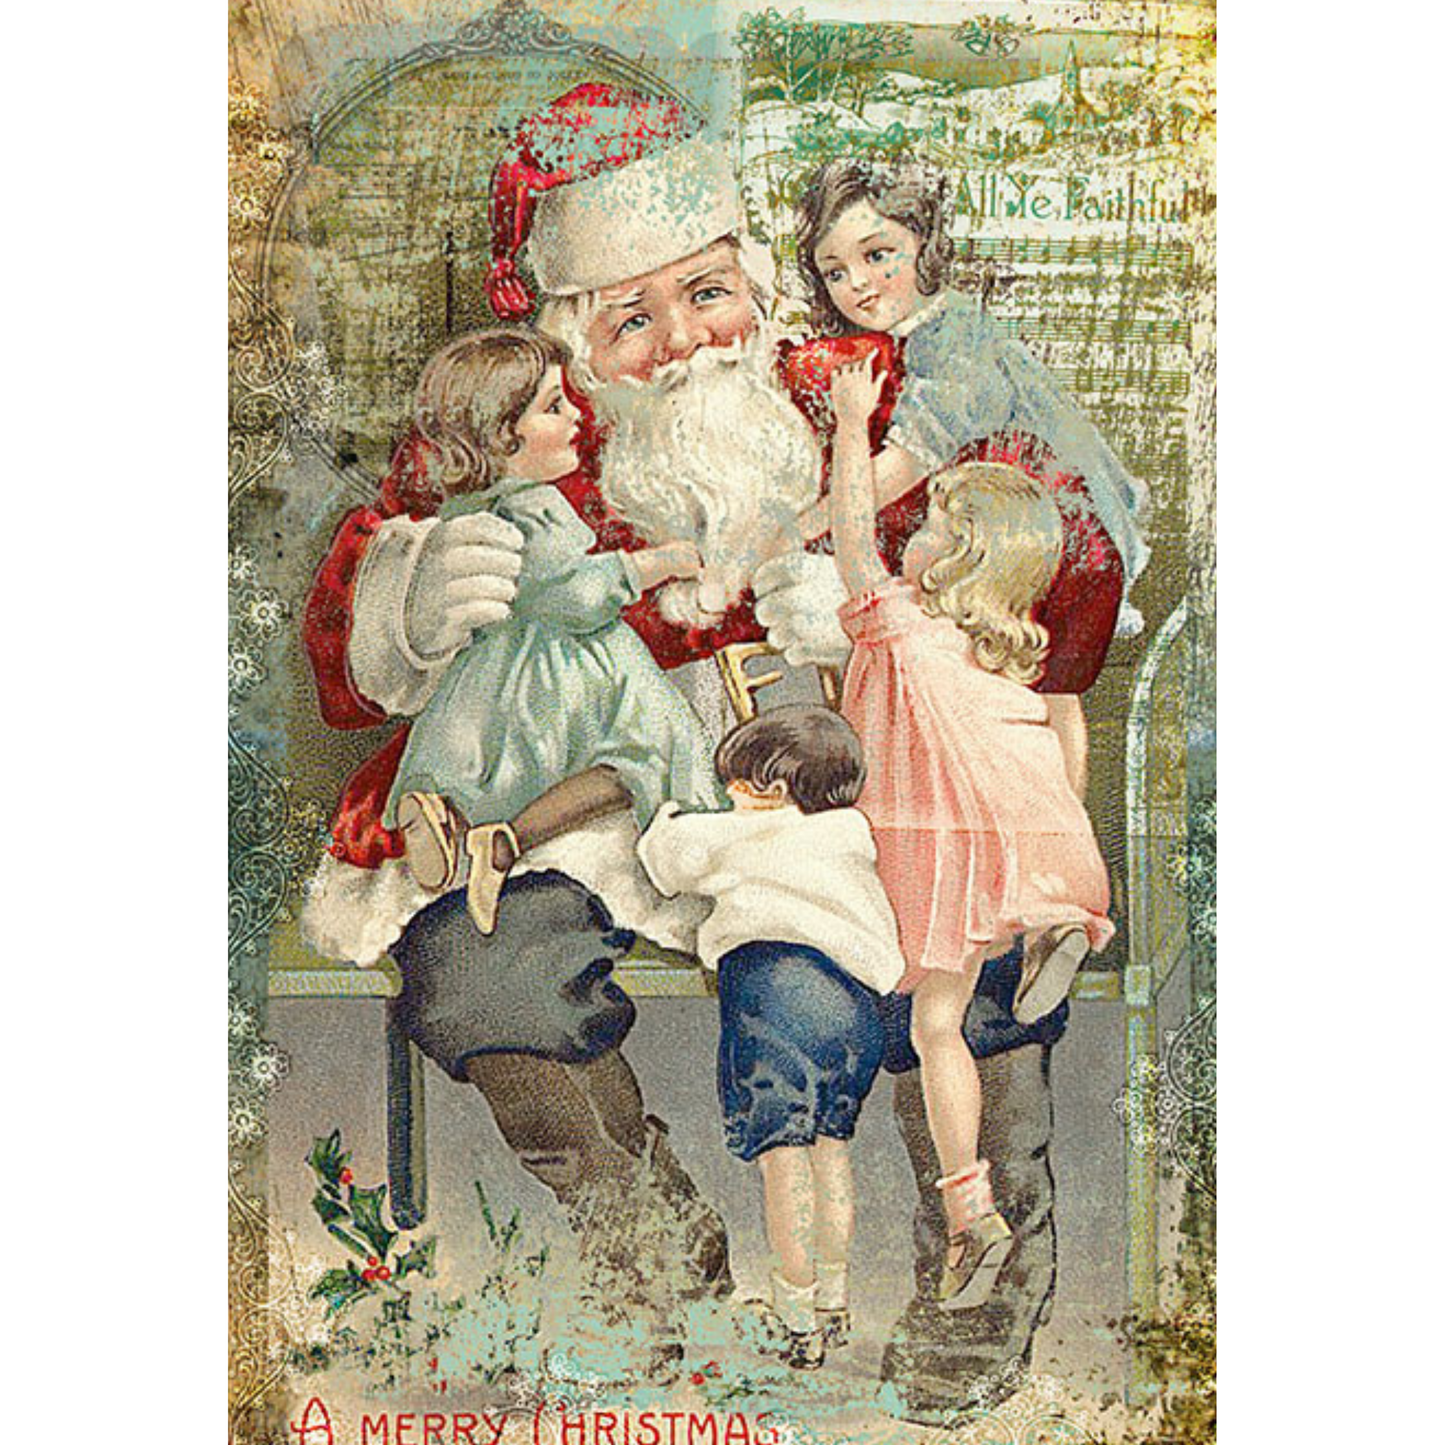 "Christmas - 0337" Paper Designs Decoupage Rice Paper imported from Italy available at Milton's Daughter in size A4 8.3" x 11.7"